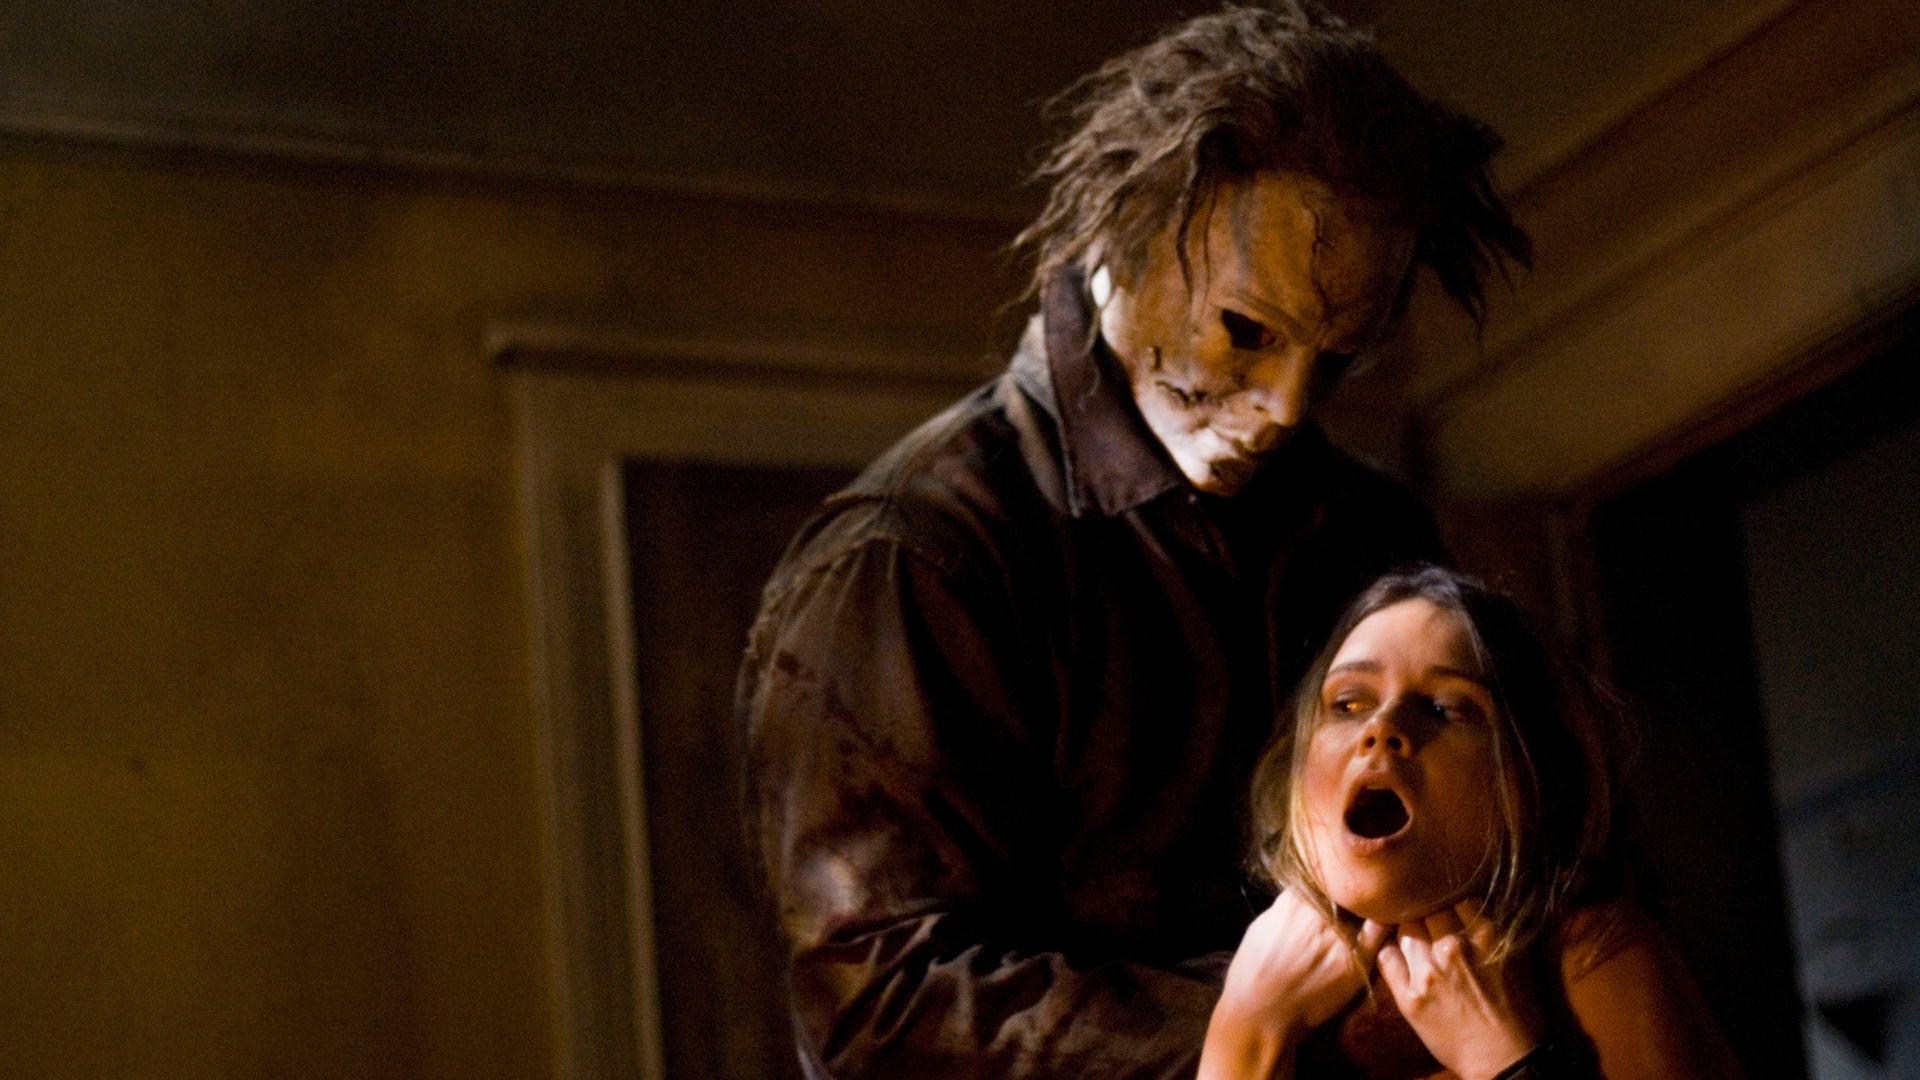 “Is the Boogeyman Real?” The Divisiveness of Rob Zombie’s “Halloween” Films